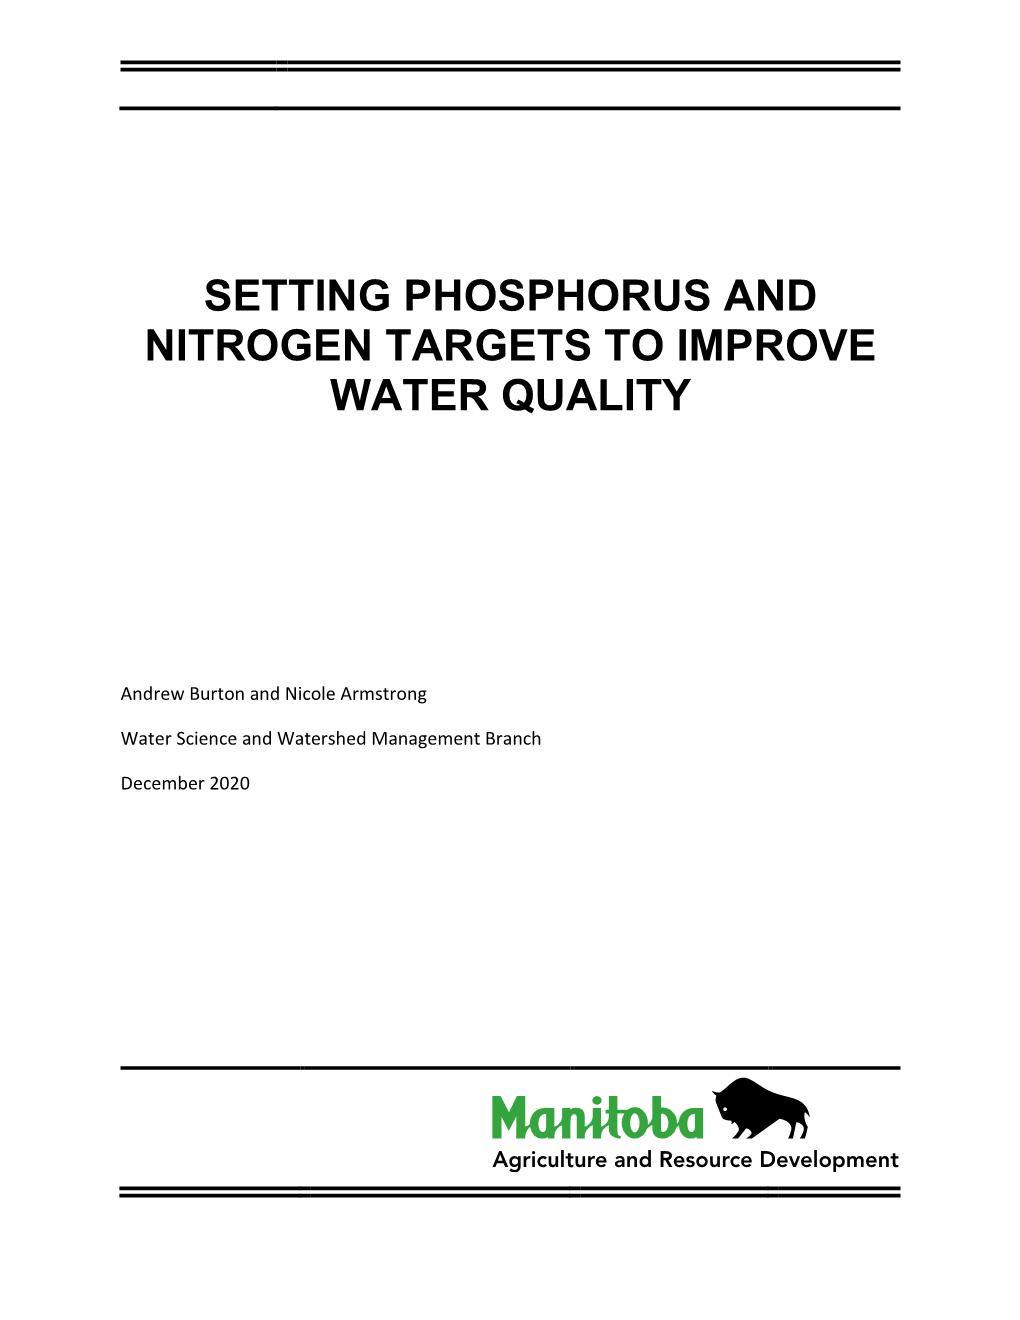 Report on Setting Phosphorus and Nitrogen Targets to Improve Water